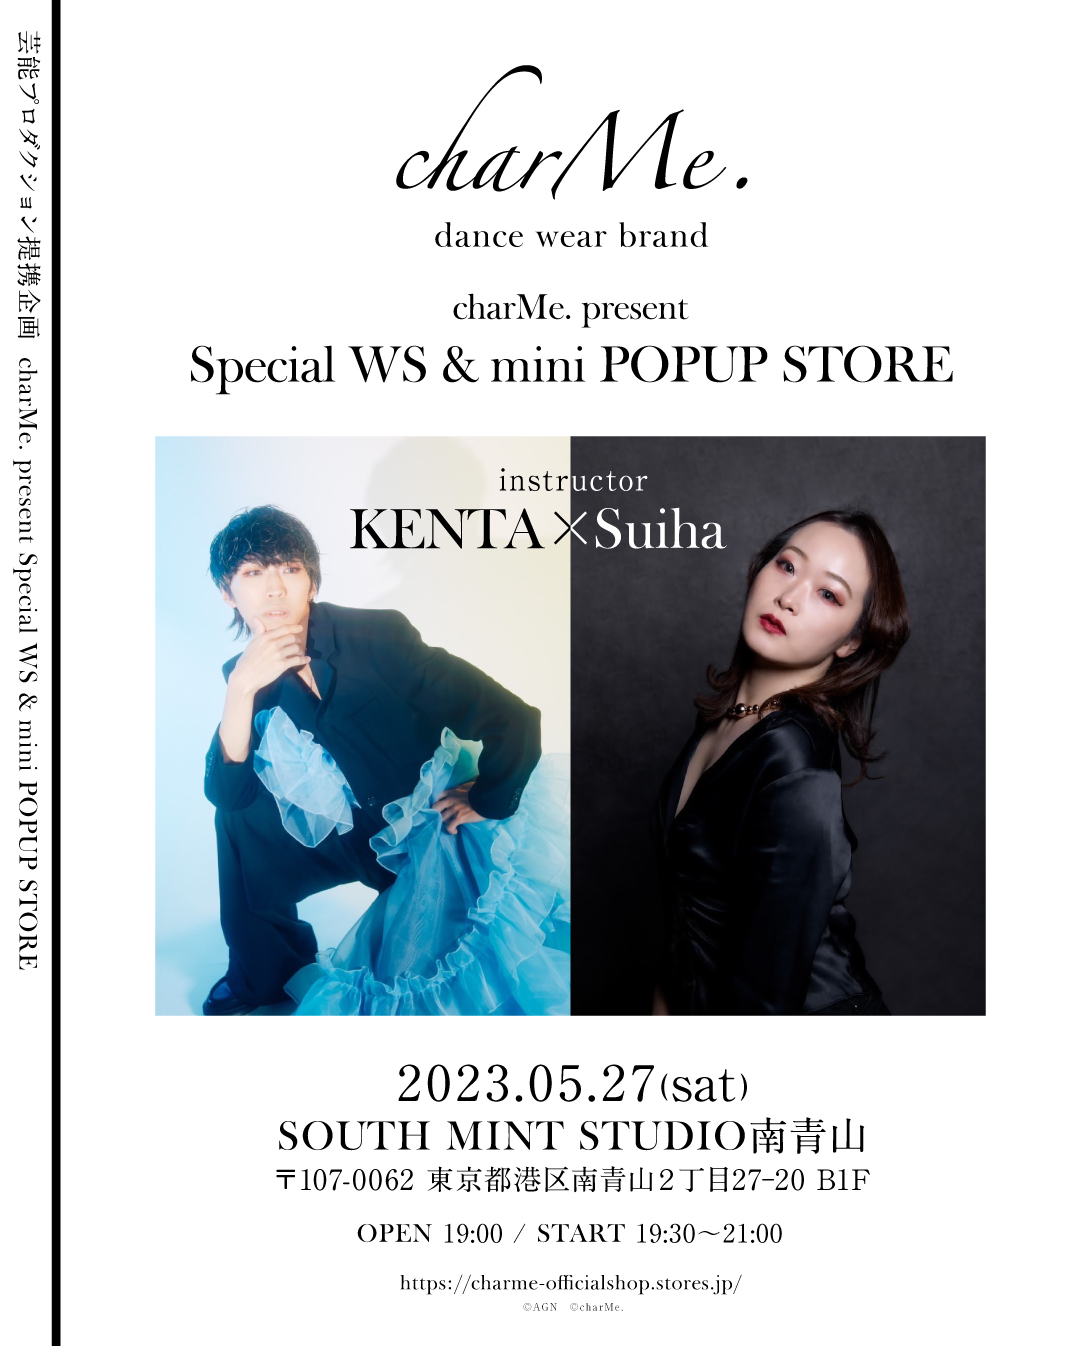 SPECIAL WS & mini POPUP STORE by charMe.